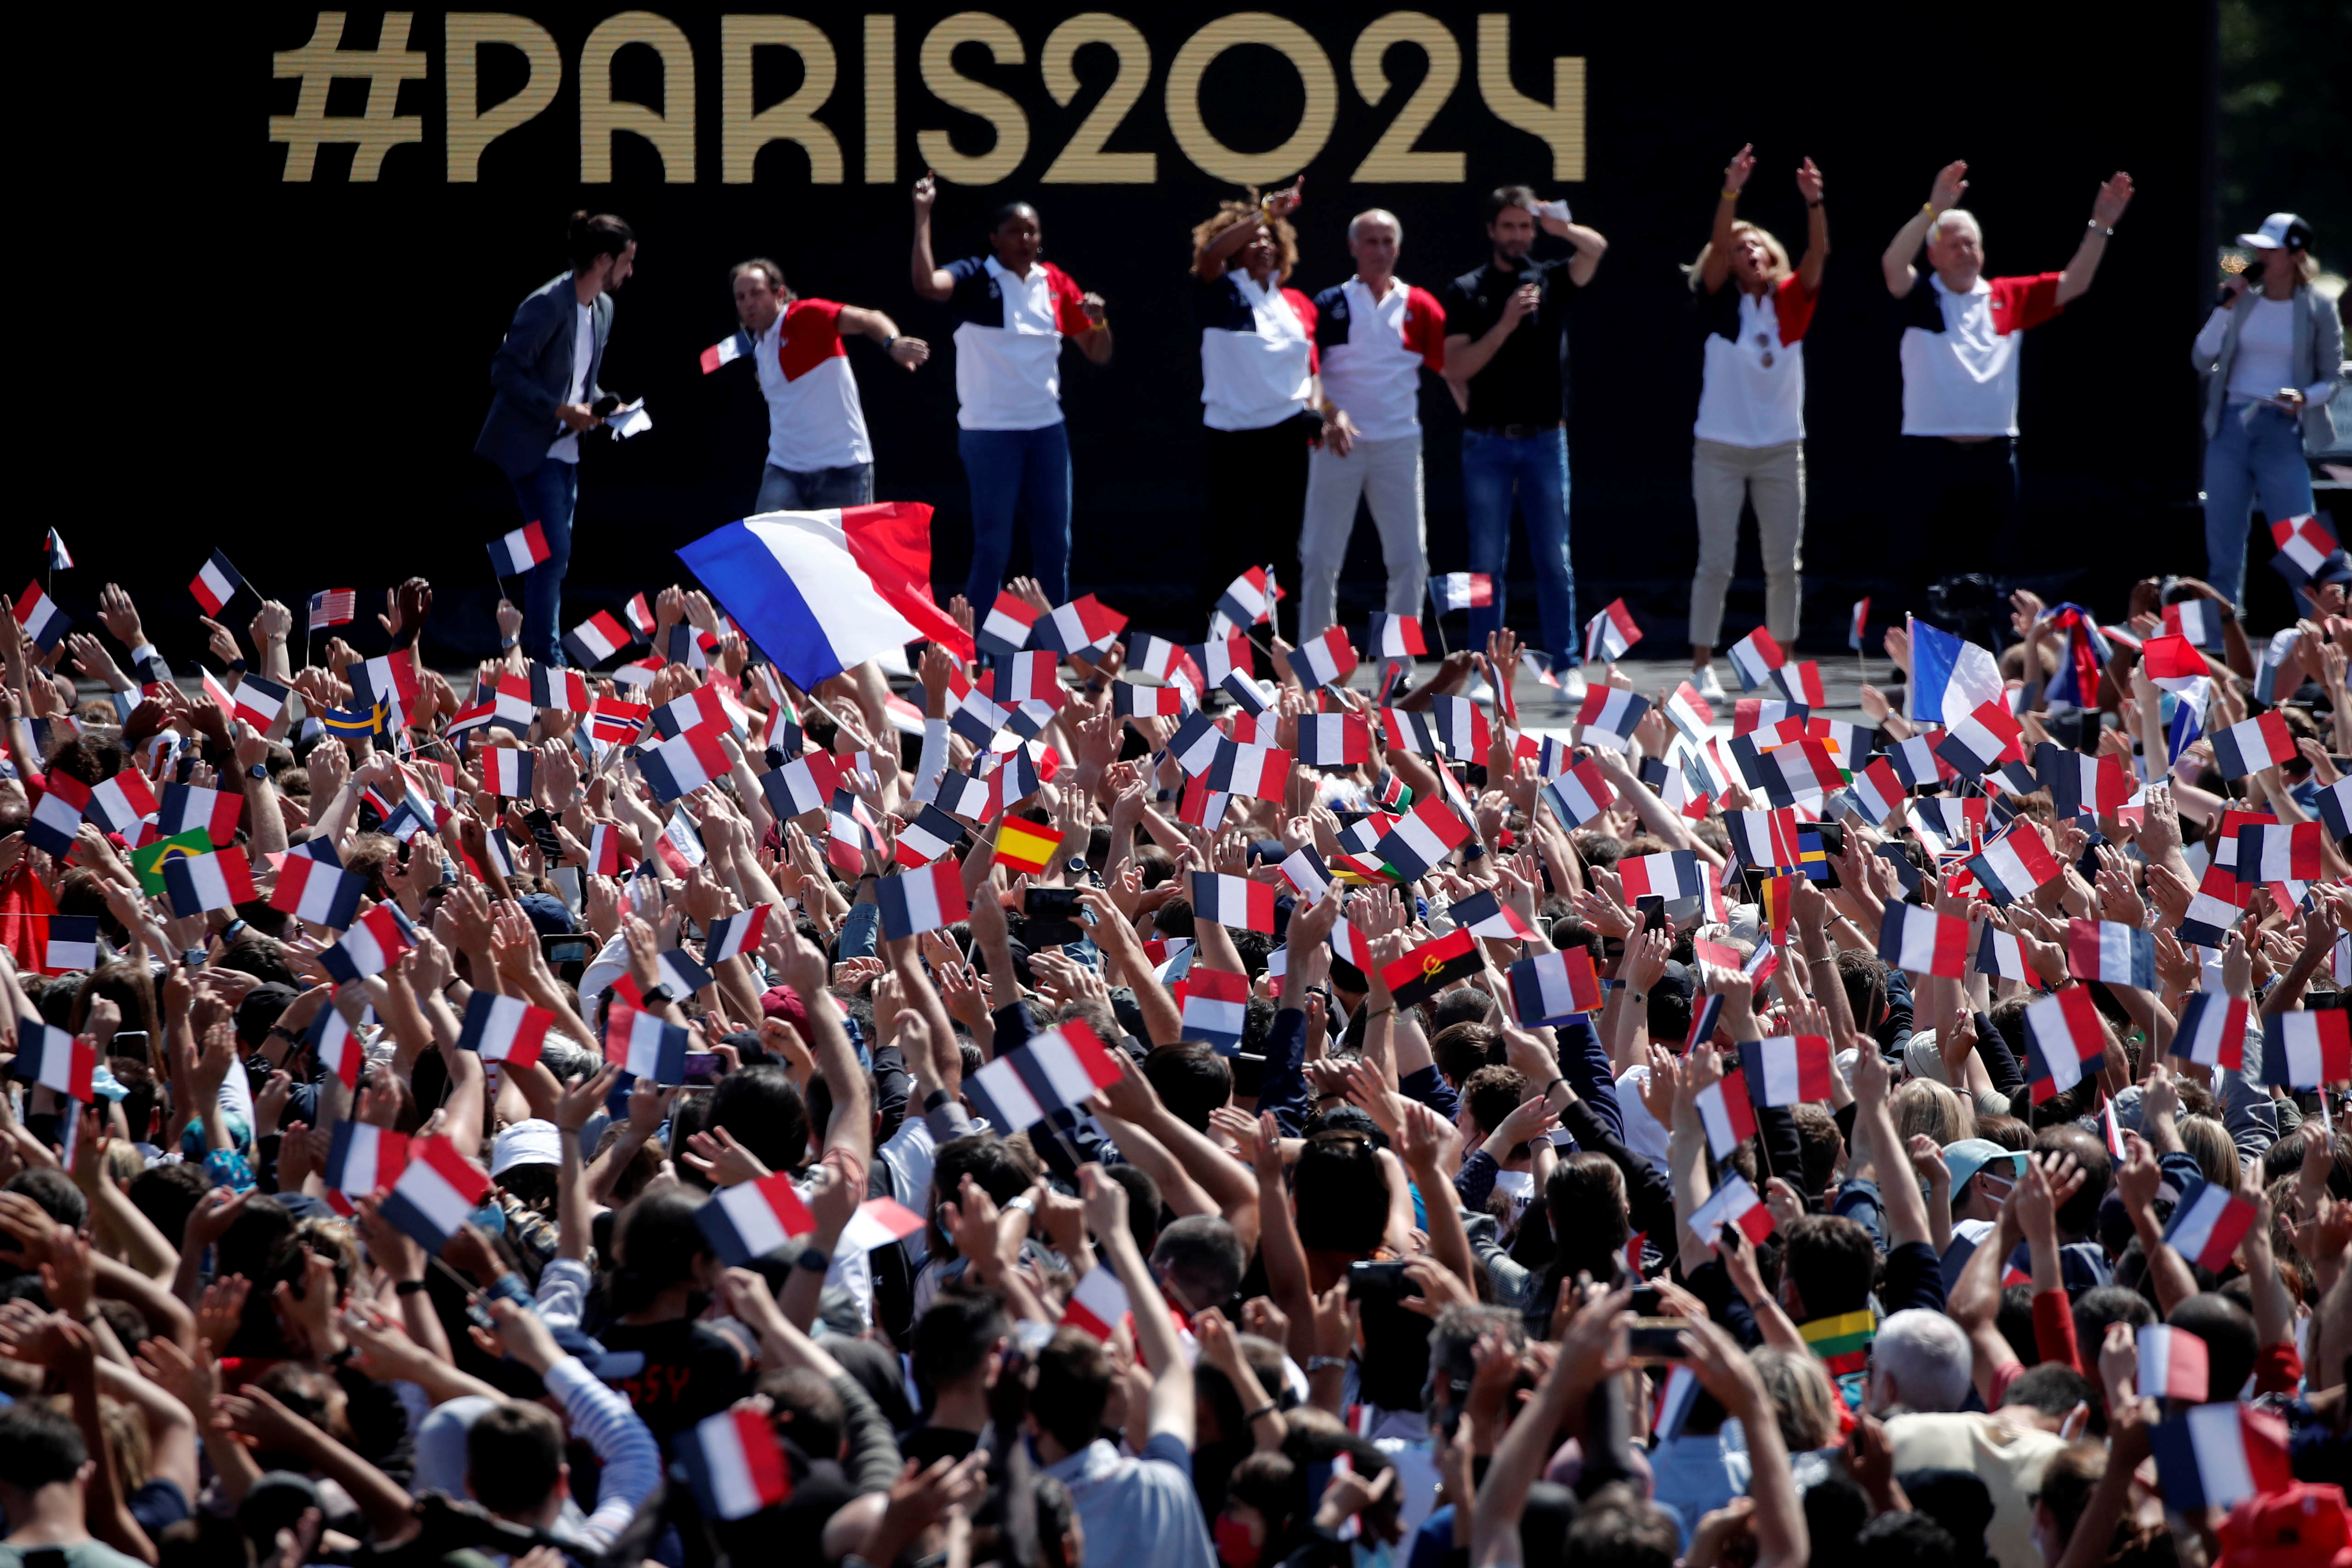 People gather at Paris' Olympics fan zone to watch the closing ceremony of the Tokyo games, in front of the Eiffel Tower, at Trocadero Gardens in Paris, France, August 8, 2021. REUTERS/Benoit Tessier